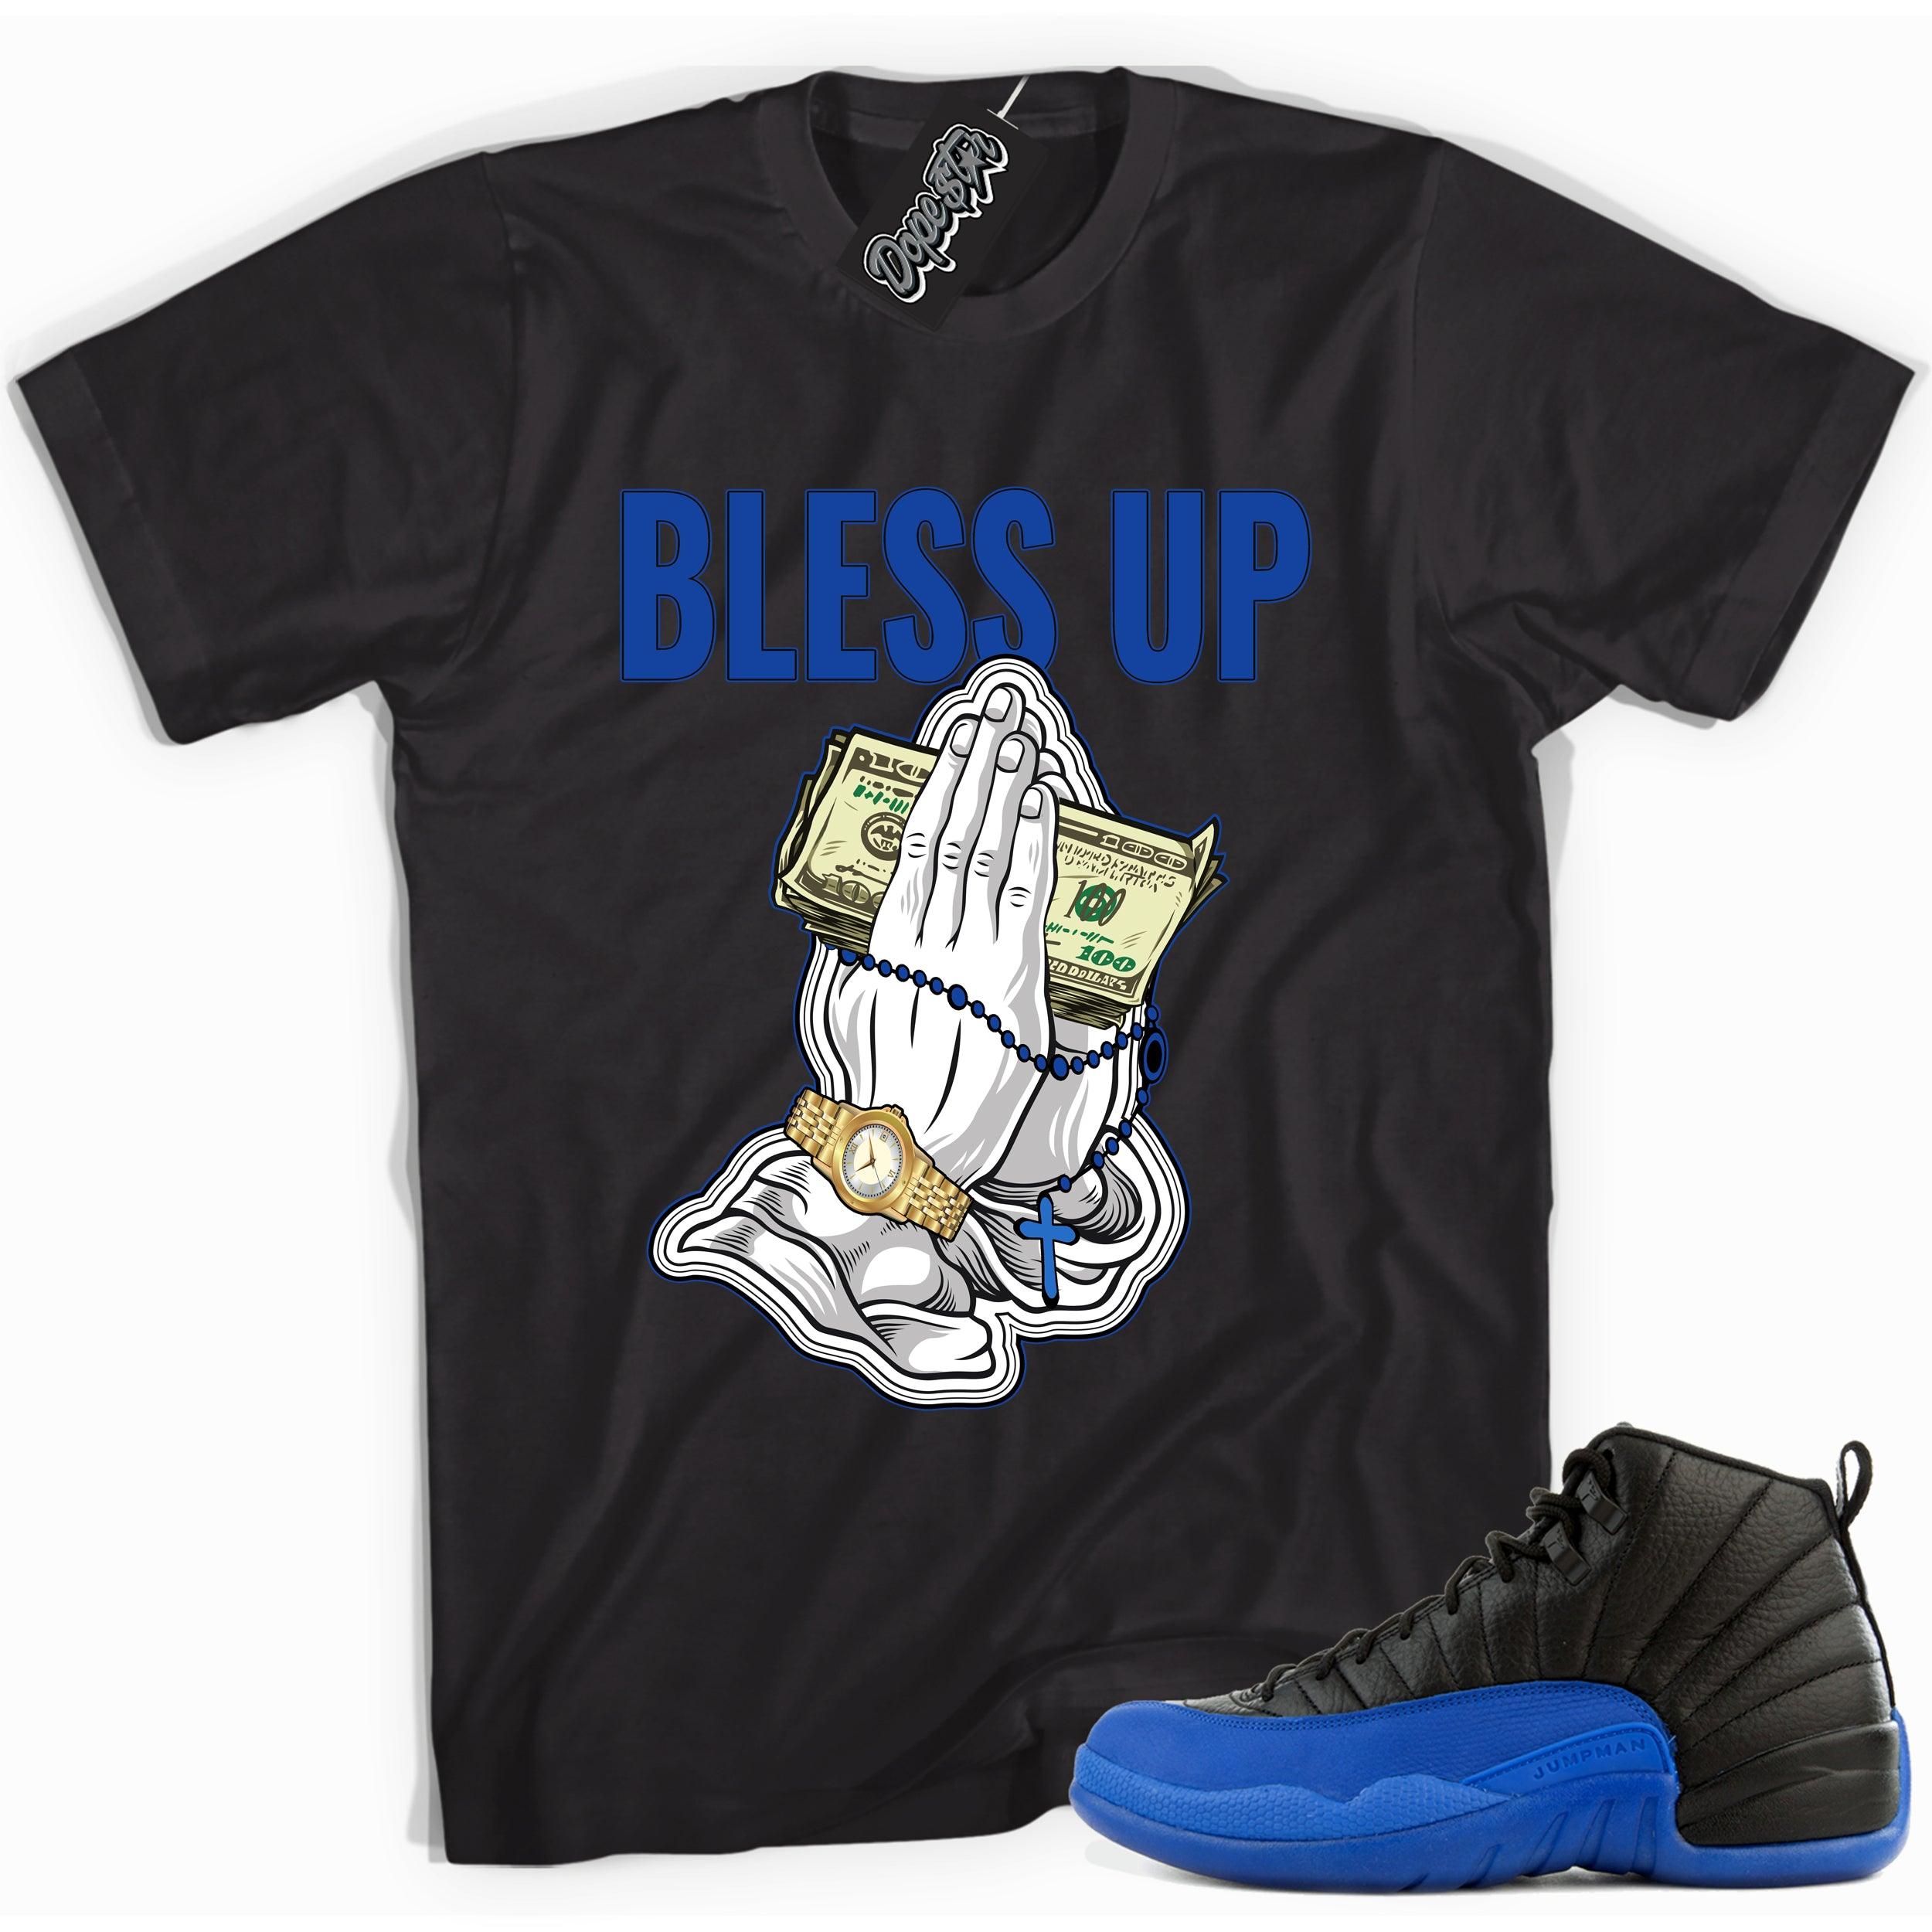 Cool black graphic tee with 'BLESS UP' print, that perfectly matches  Air Jordan 12 Retro Black Game Royal sneakers.